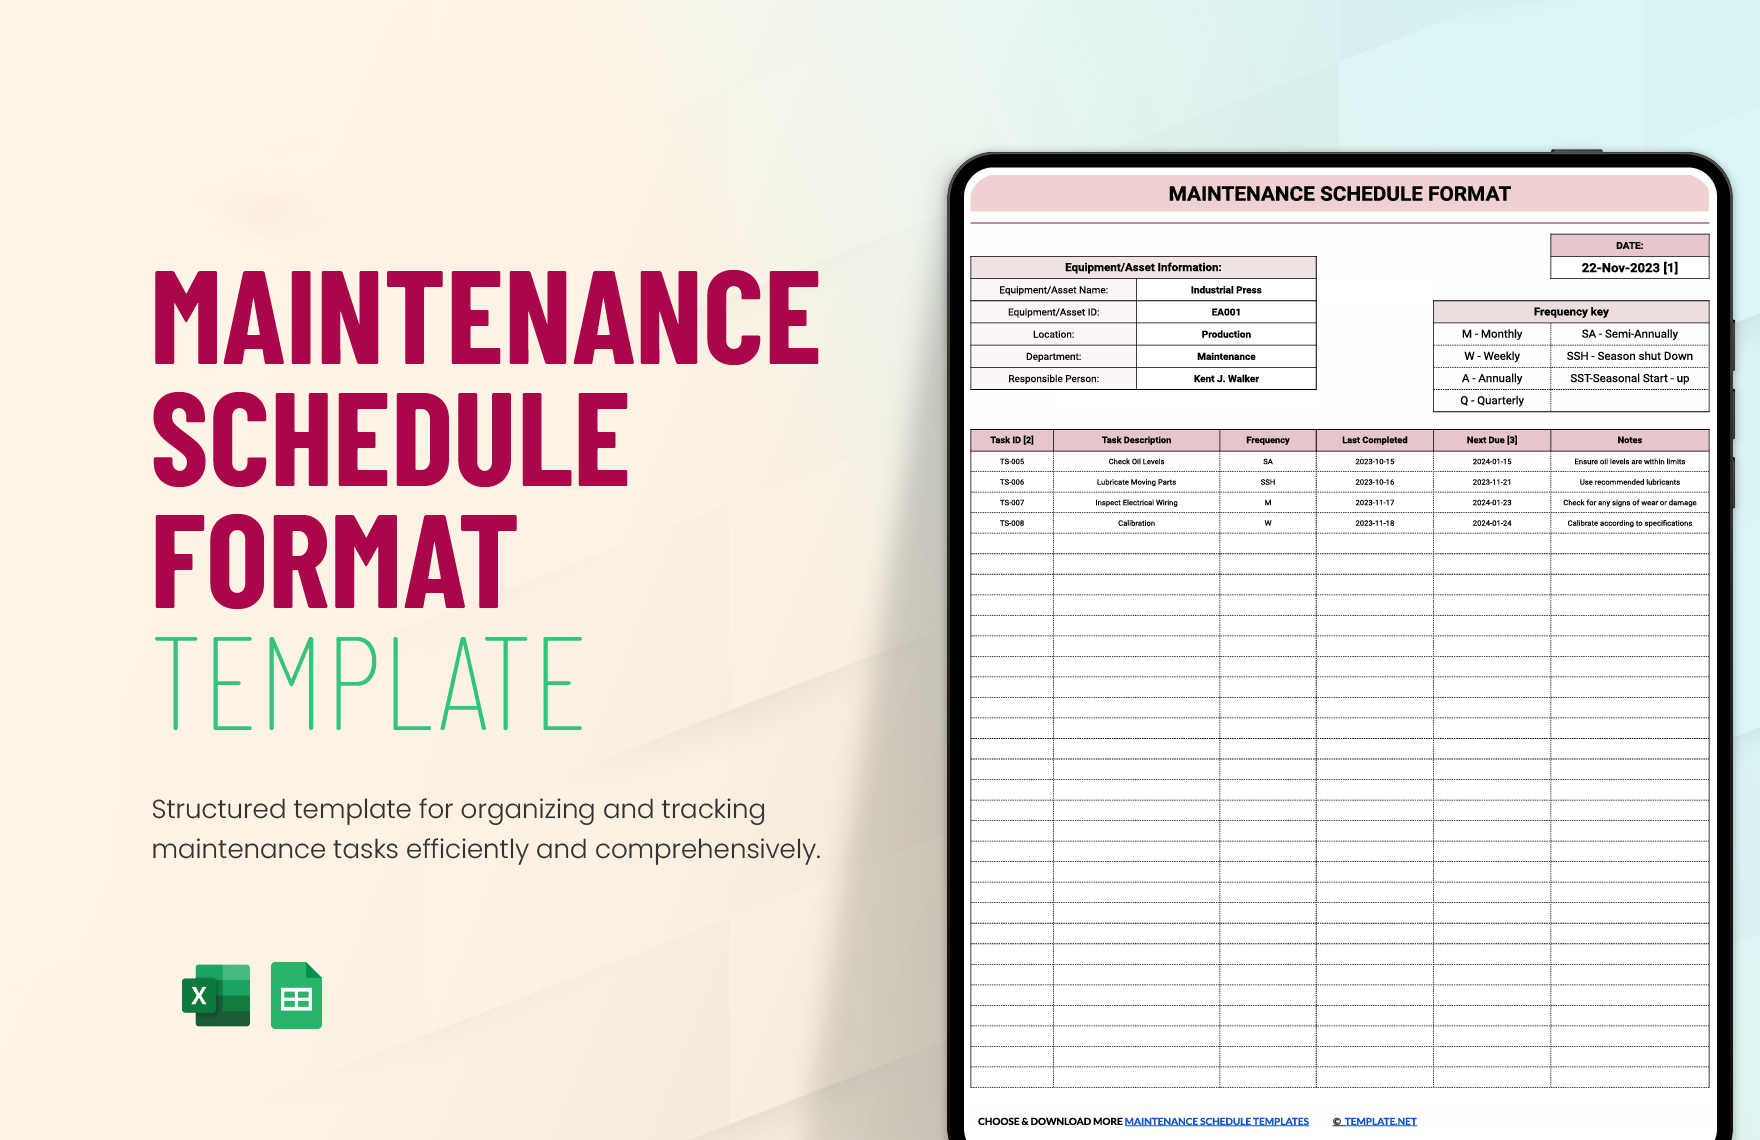 Free Maintenance Schedule Format Template in Excel, Google Sheets